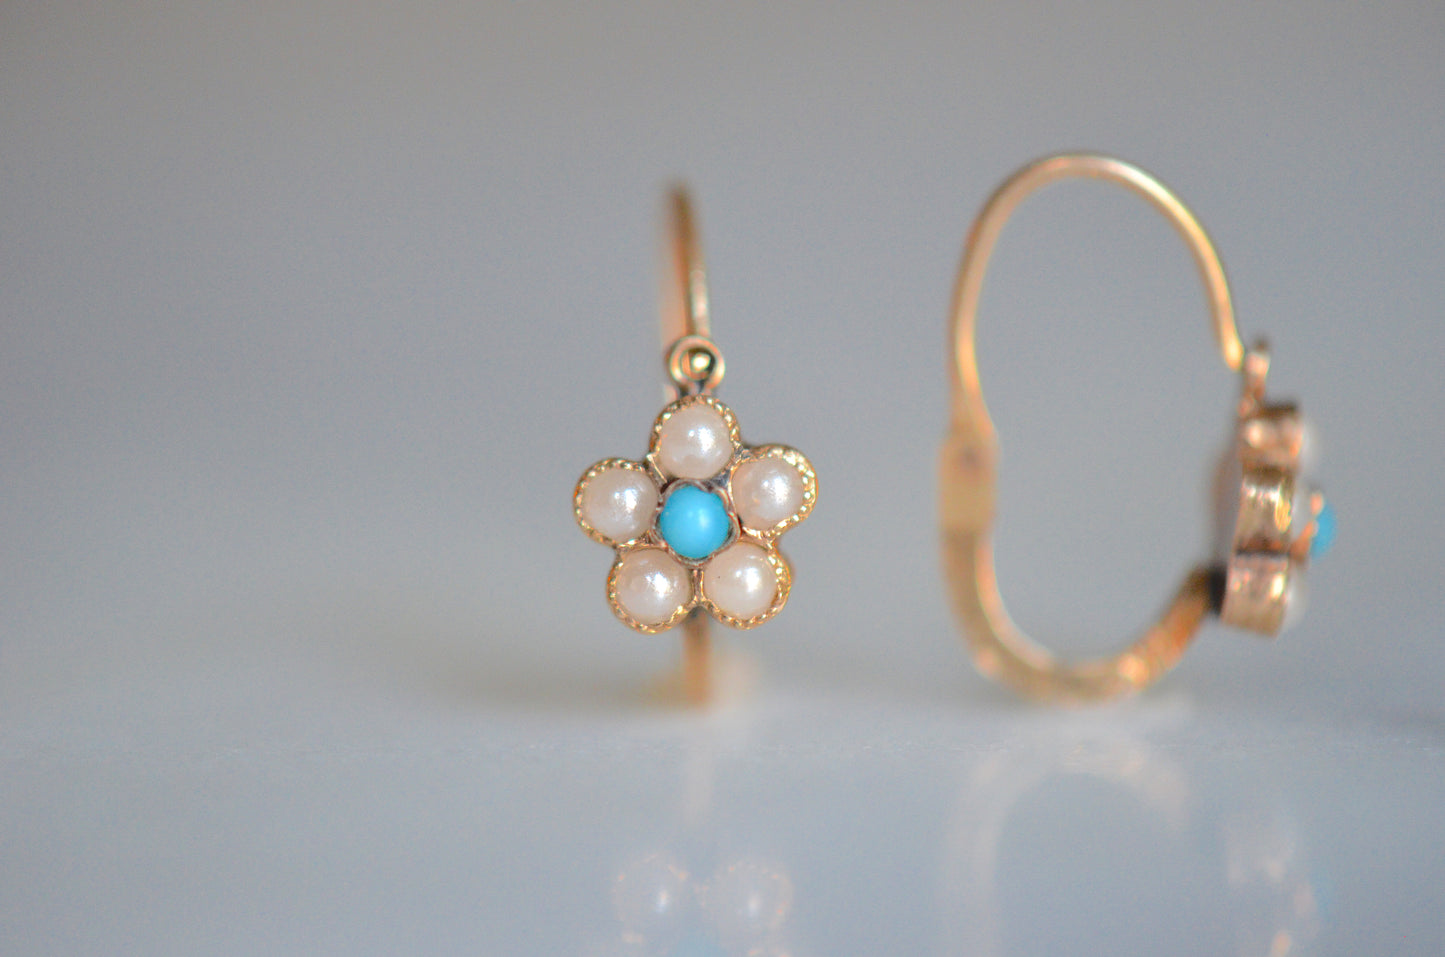 Dainty 1930s Floral Dormeuses Hoops